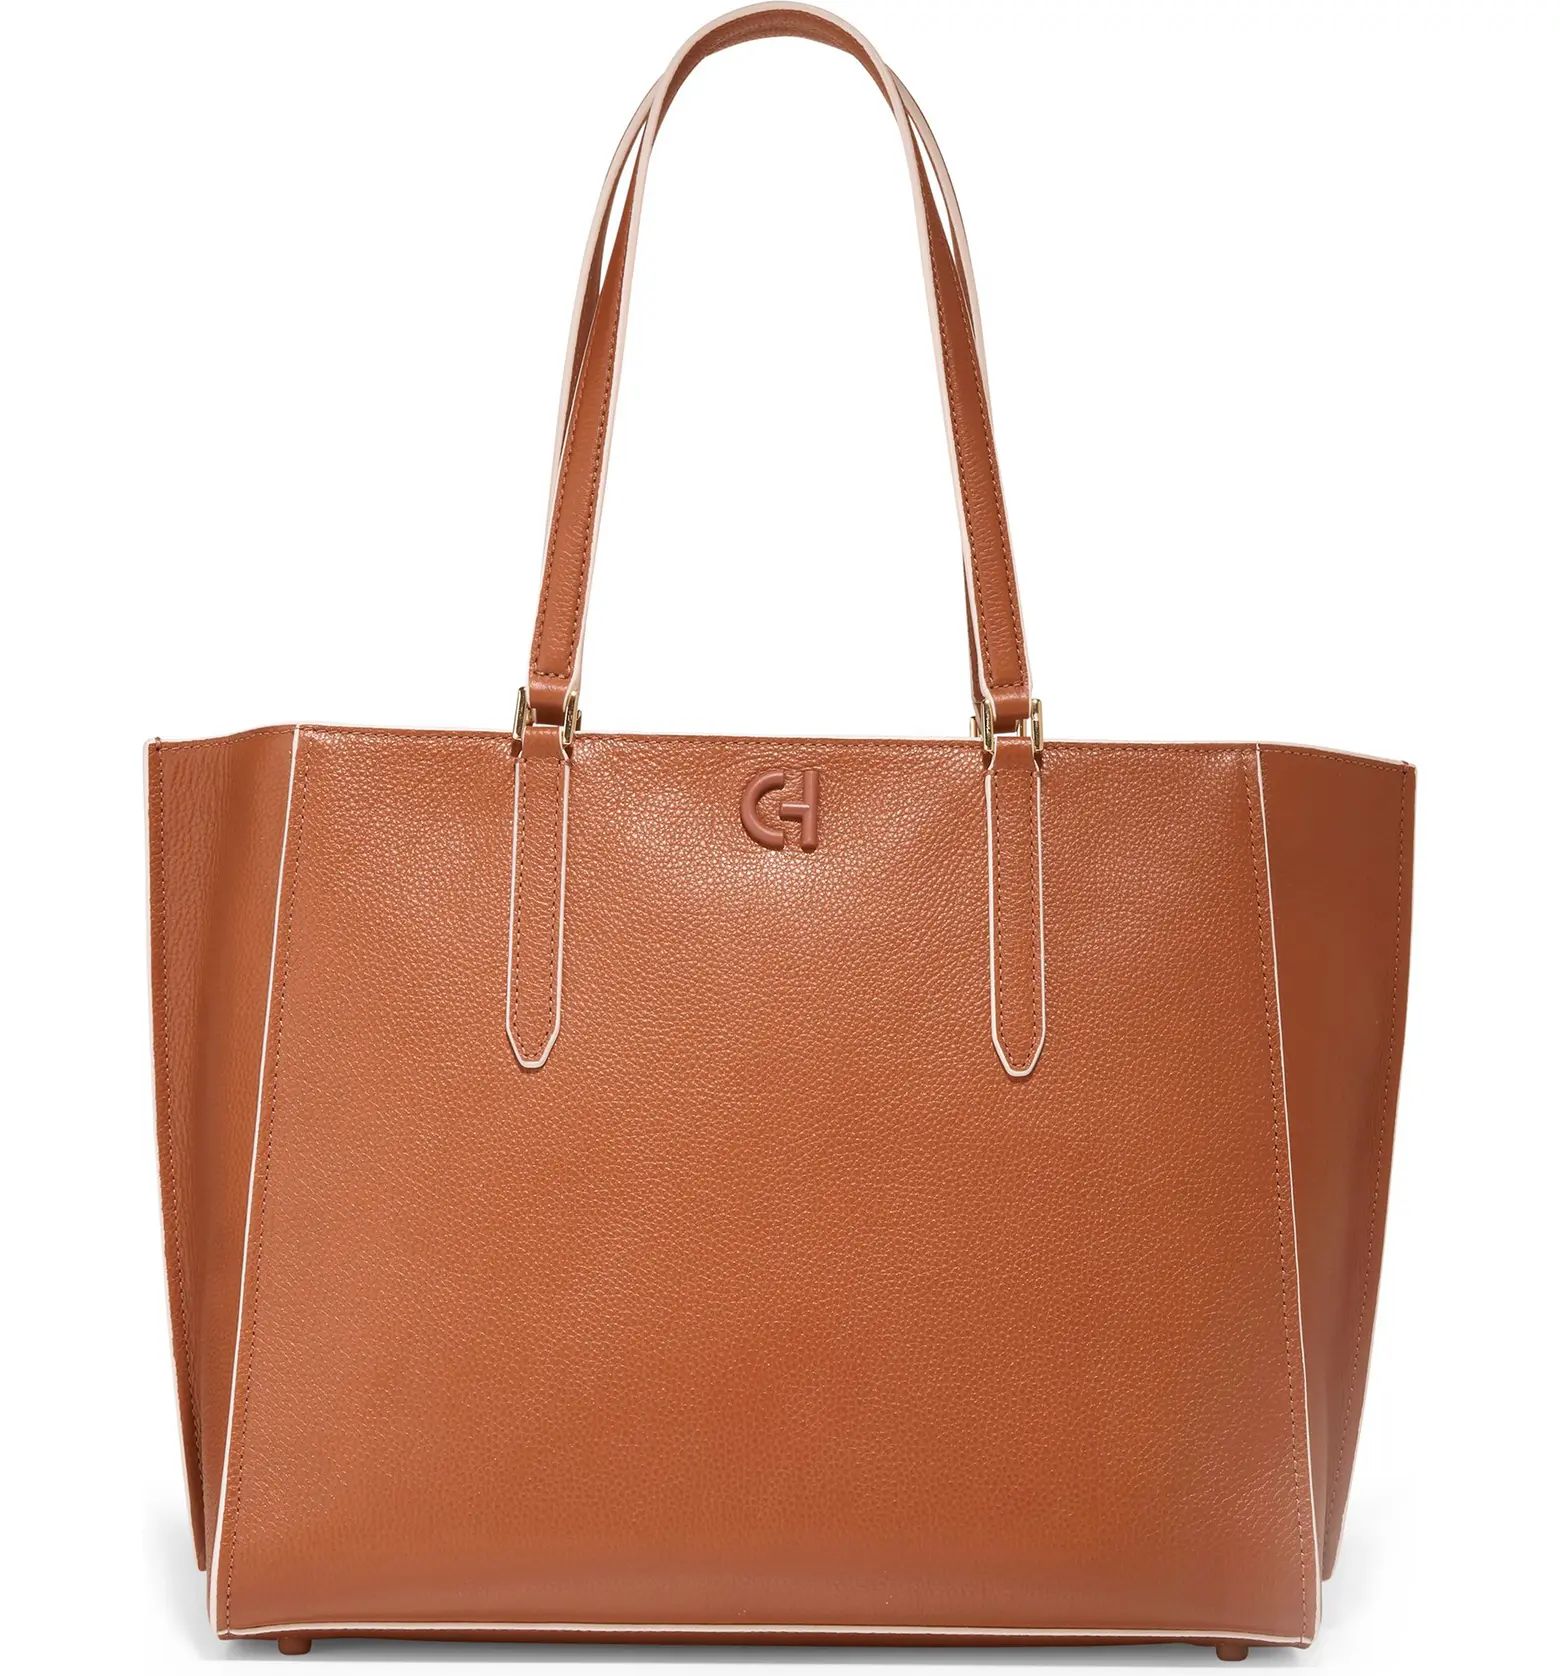 Go-To Leather Tote | Nordstrom